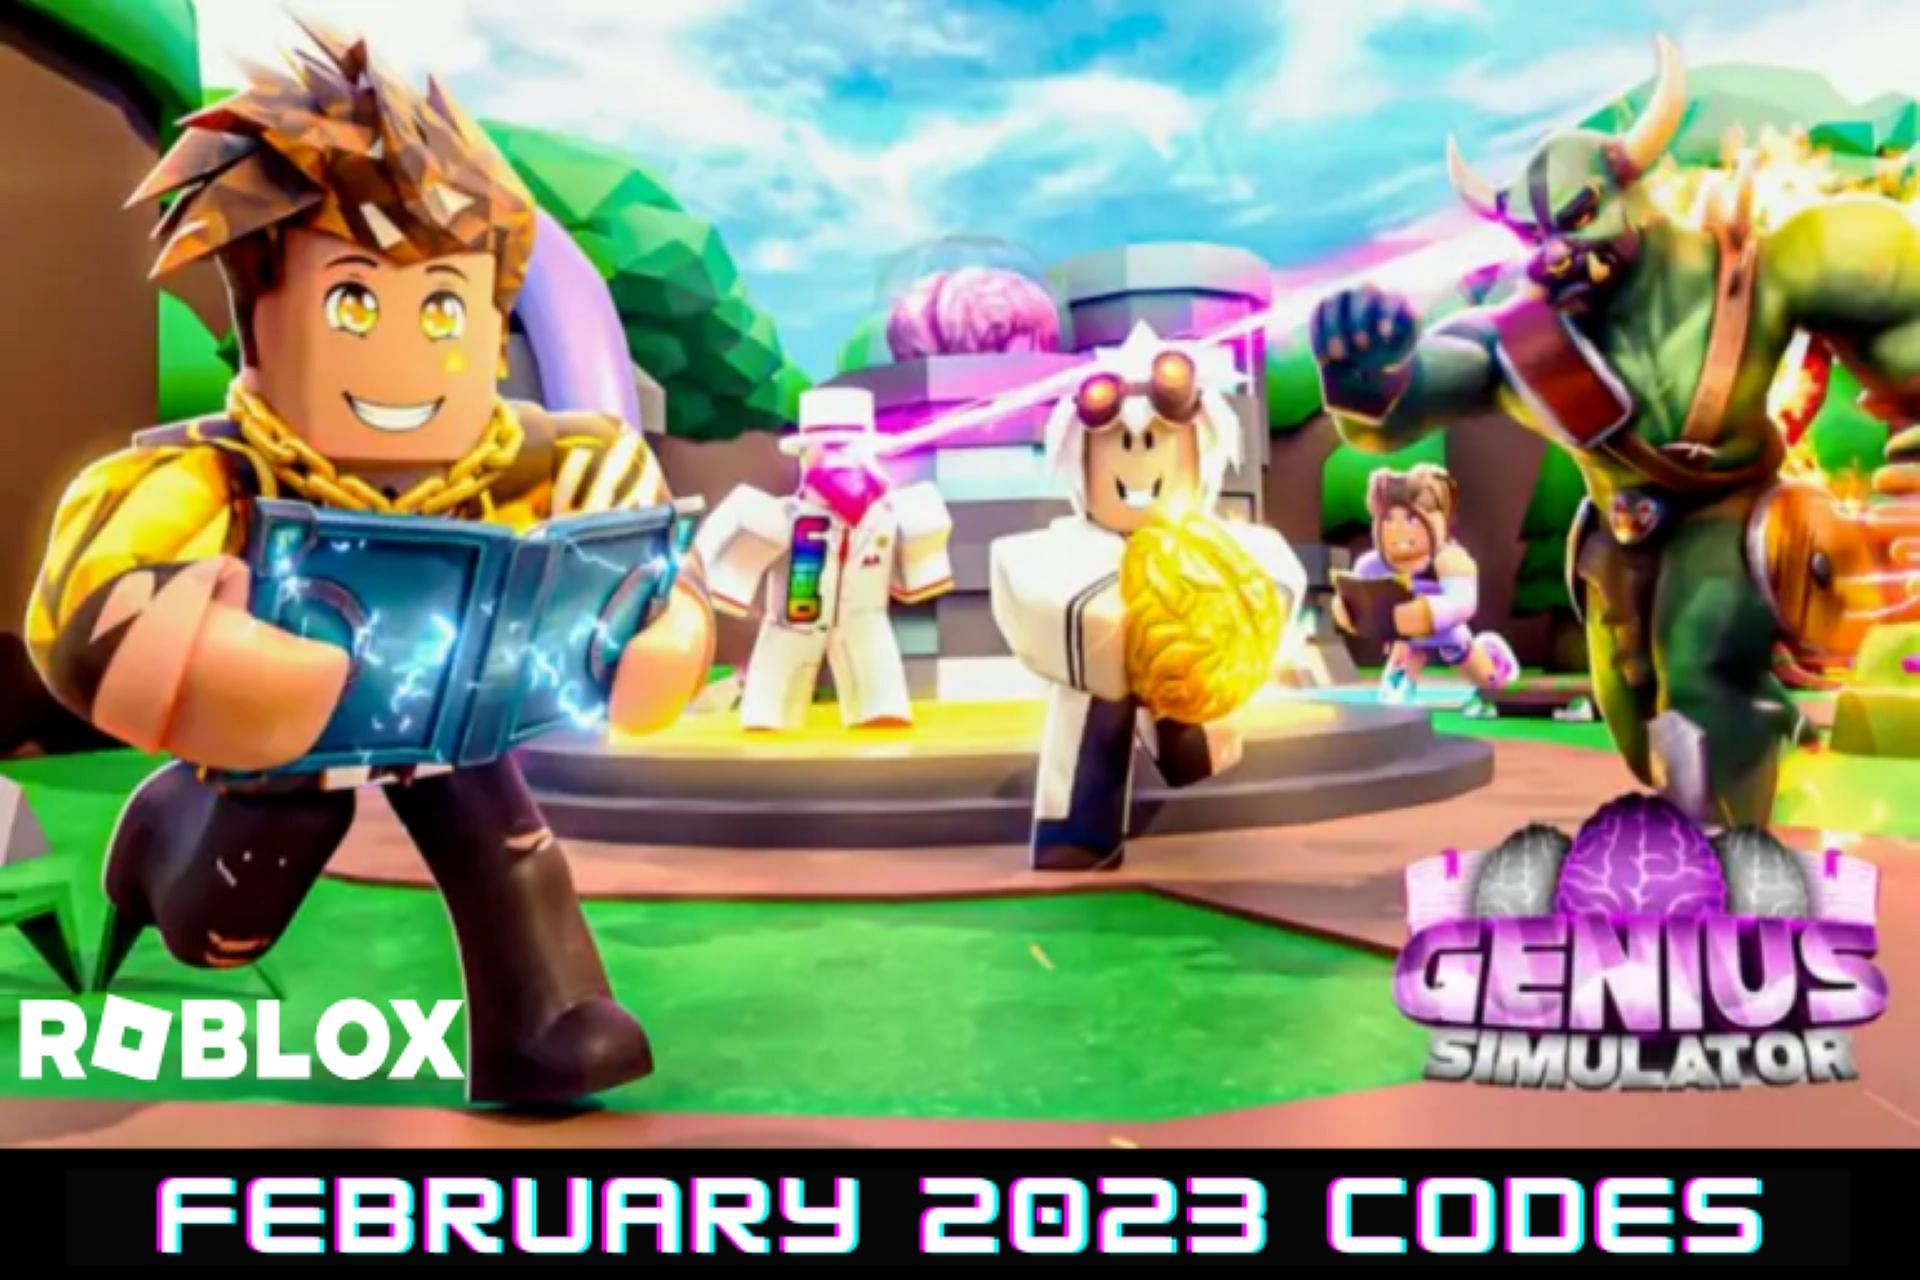 Roblox Genius Simulator Codes for February 2023: Free boosts, luck